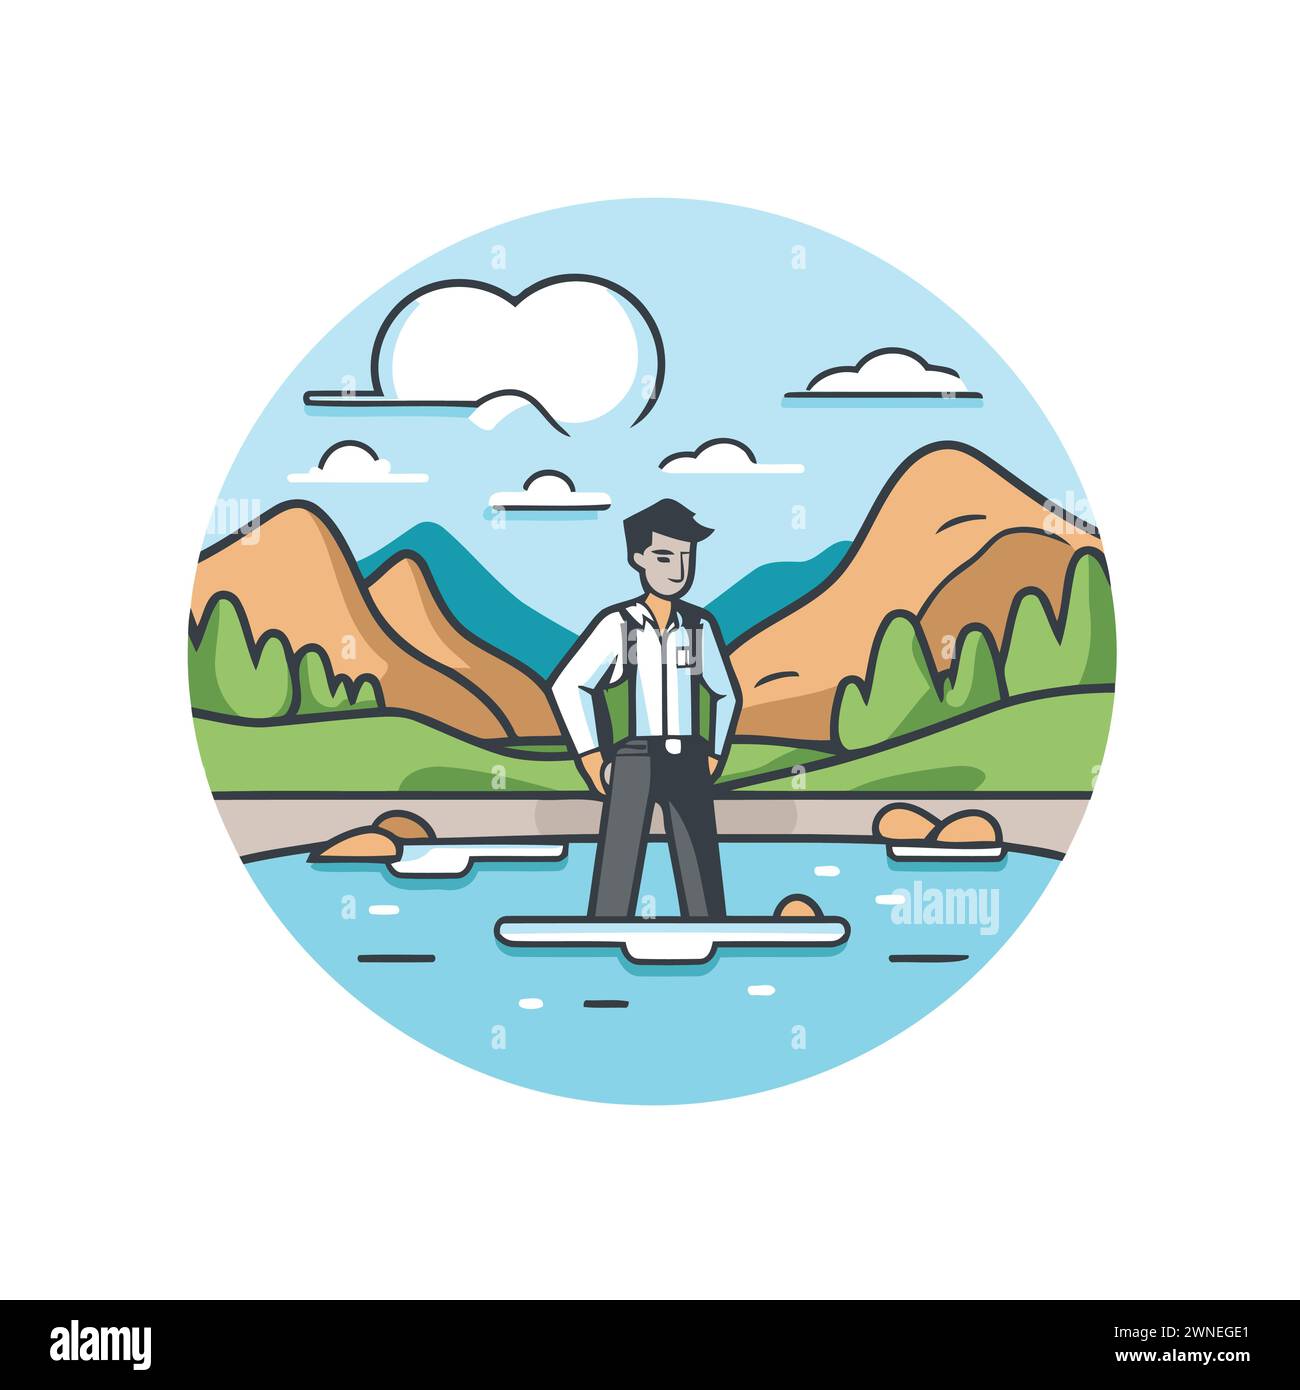 Businessman on stand up paddle board. Flat style vector illustration. Stock Vector